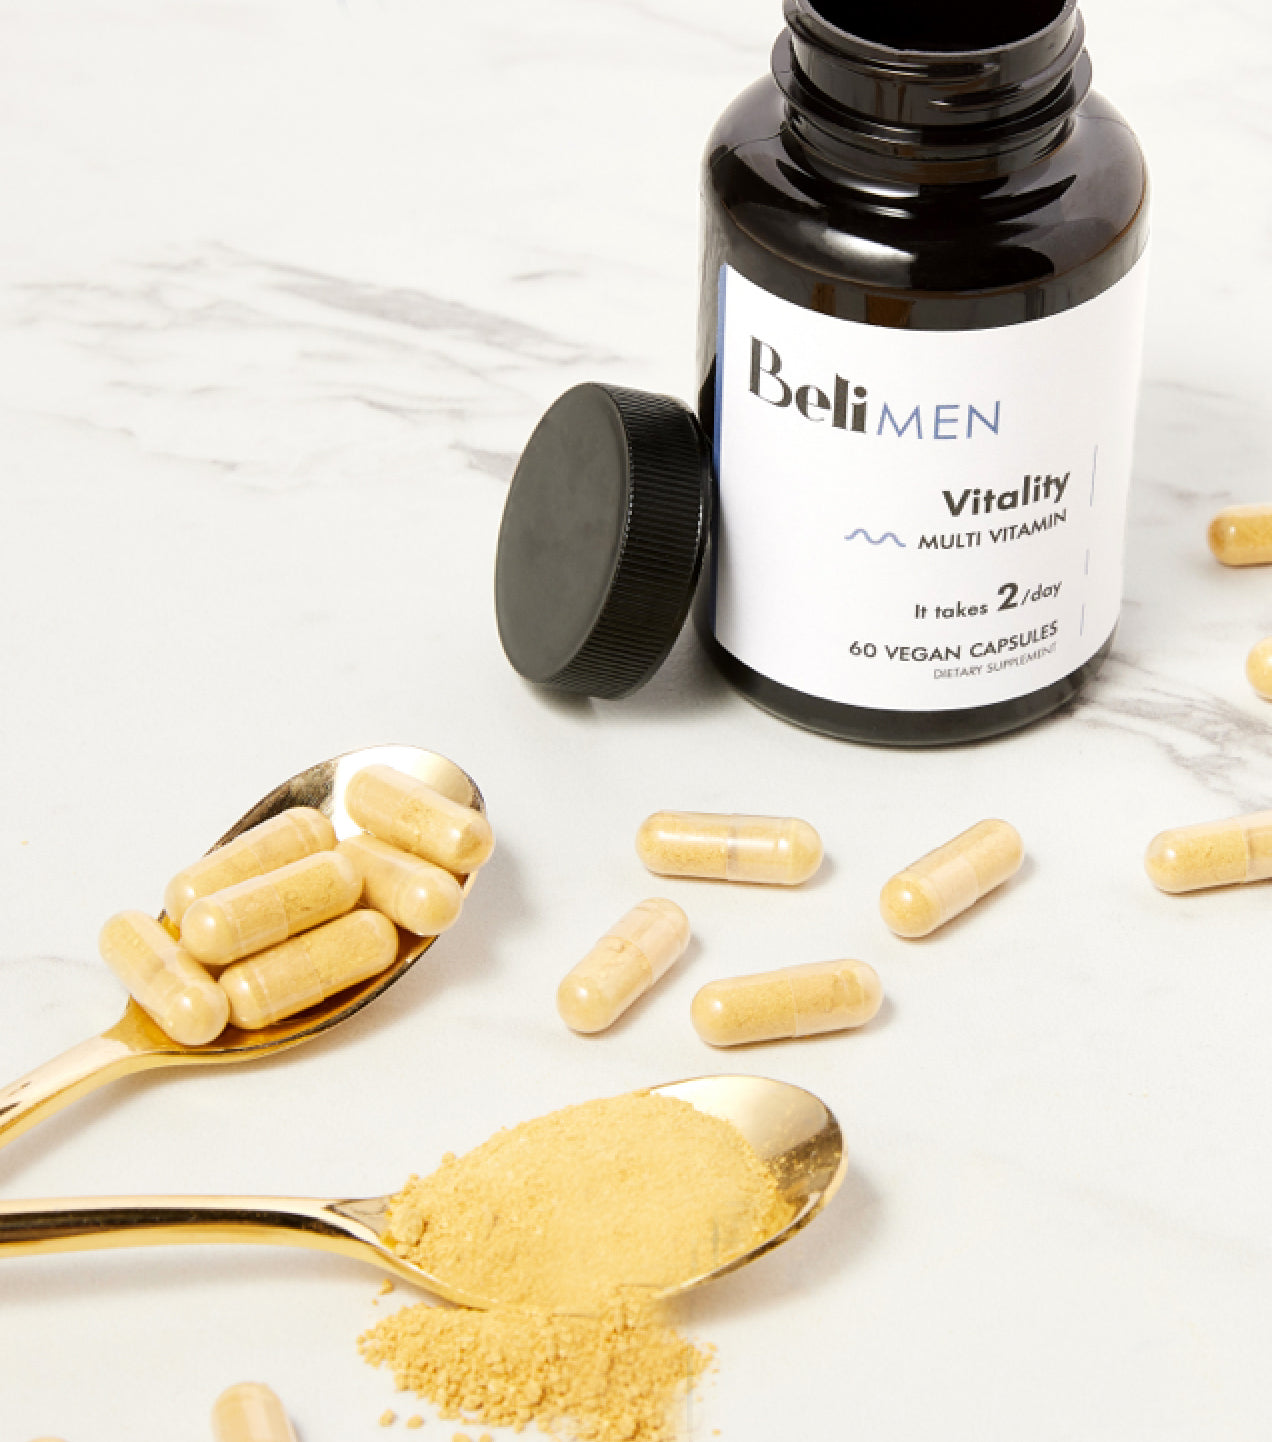 Beli Vitality for Men on a table with some capsules surrounding the bottles. There are two spoons with some capsules on them and some powder from the capsule.